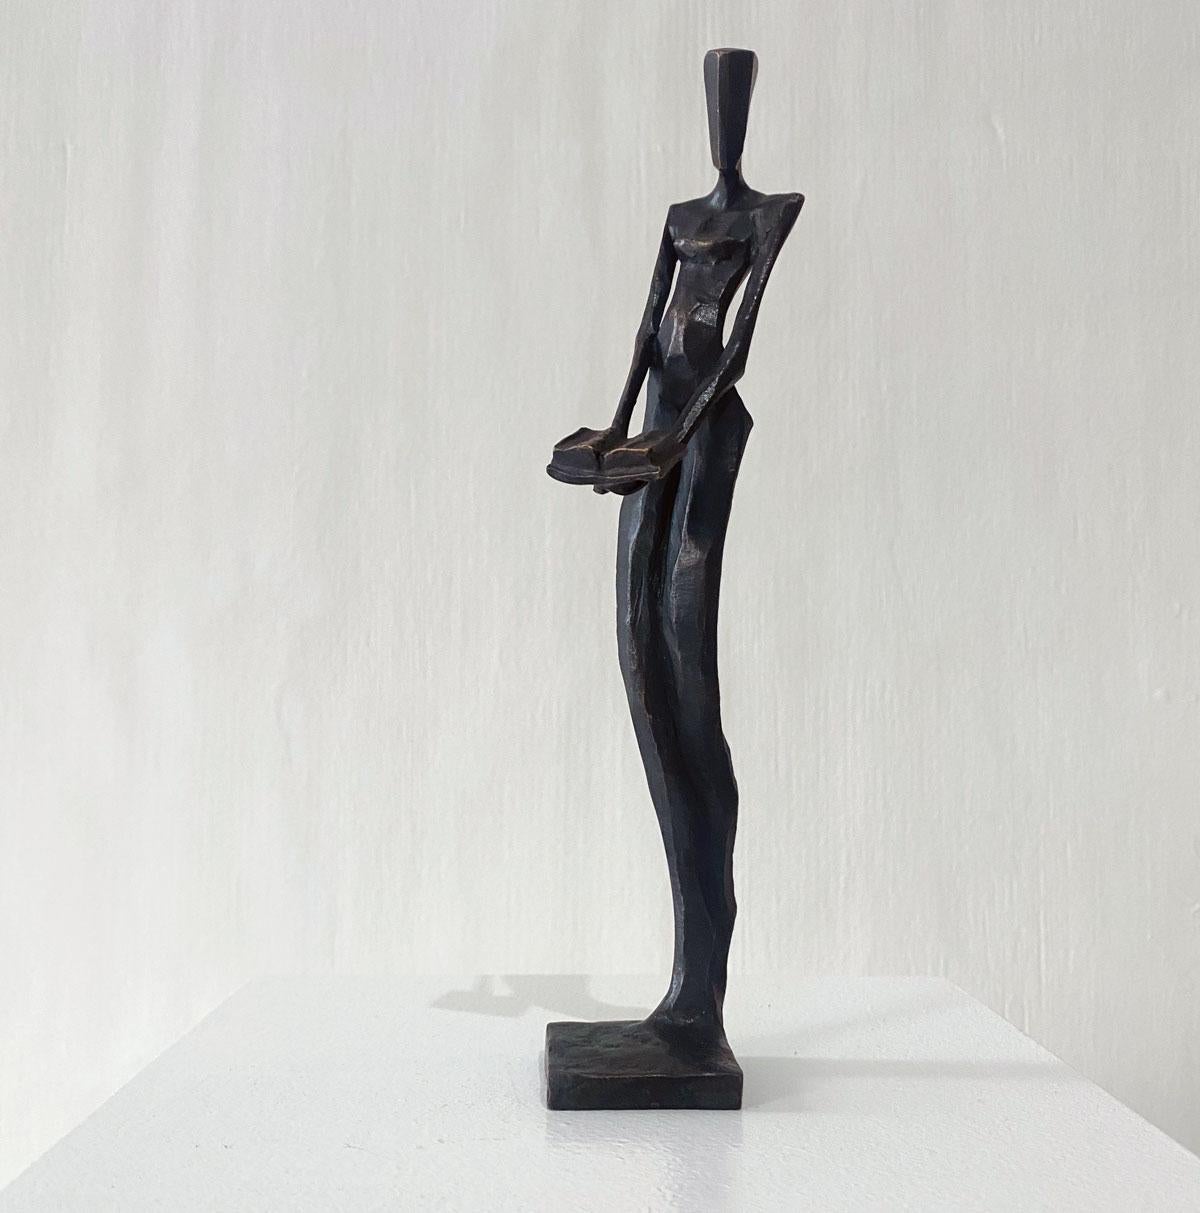 Woman with Book is an elegant figurative bronze sculpture by Nando Kallweit.

Modelled on modern youthful postures but with a nod to the importance of heritage through the stylised Egyptian-influenced head. A lovely piece on its own or with a group